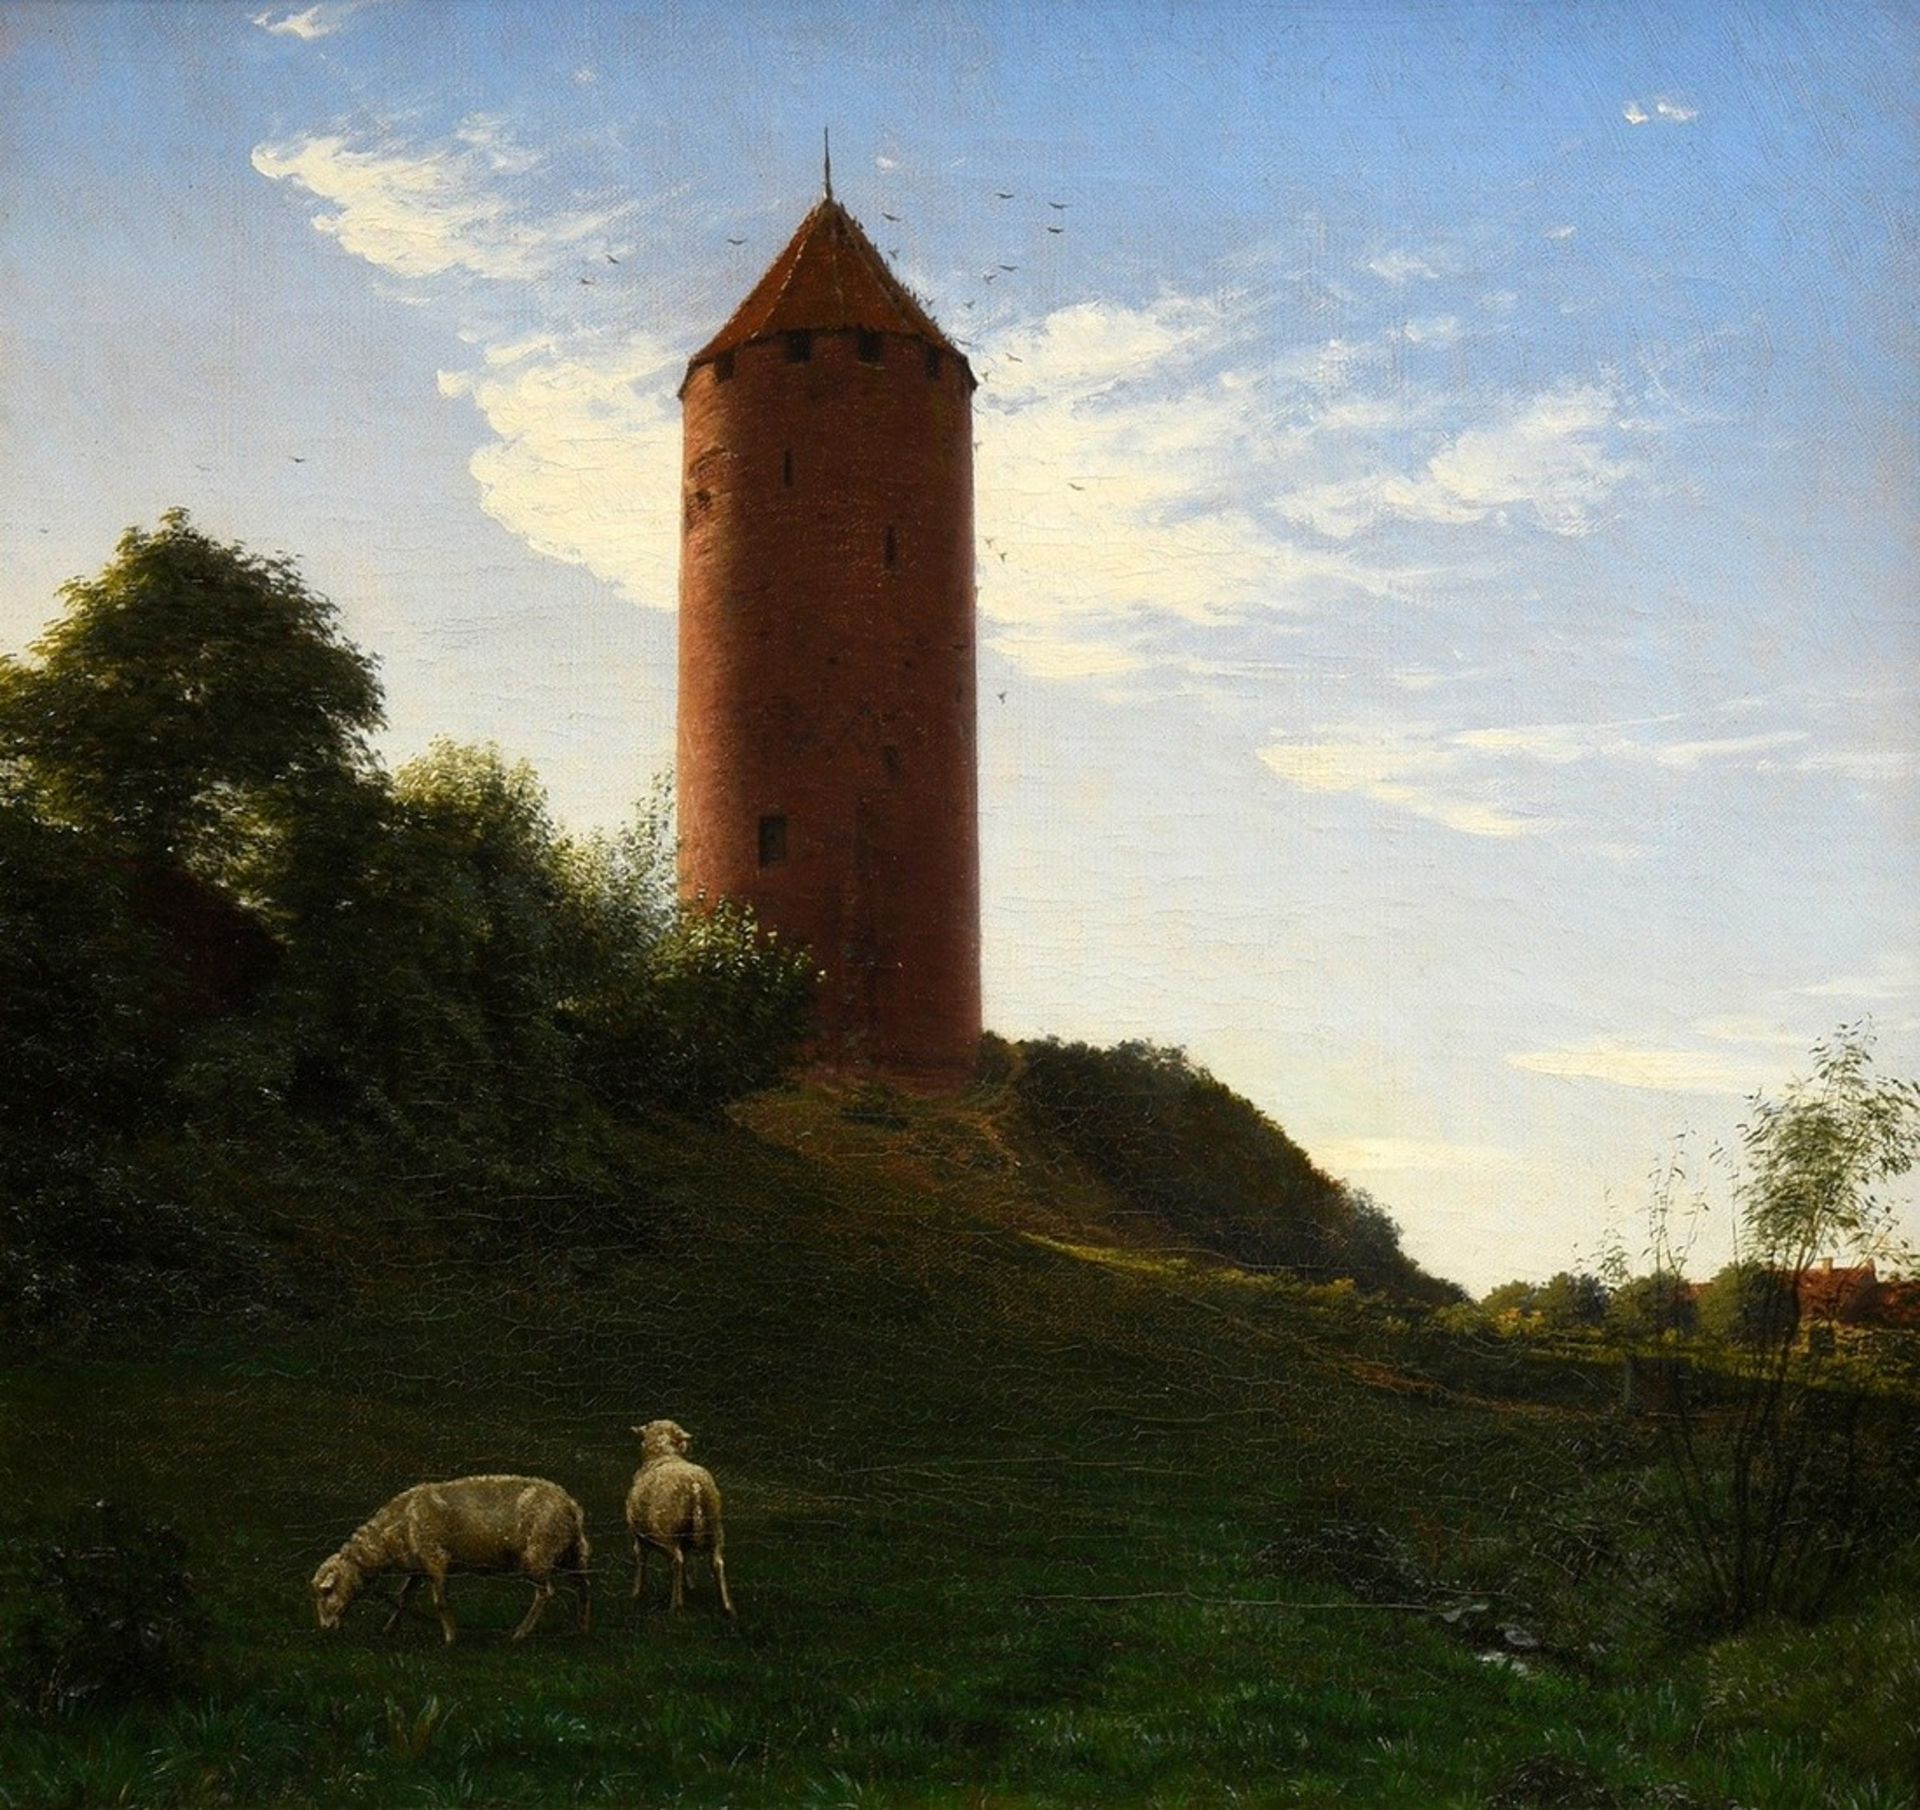 Jerndorff, August Andreas (1846-1906) "Goose Tower in Vordingborg" 1867, oil/canvas, lower left sig